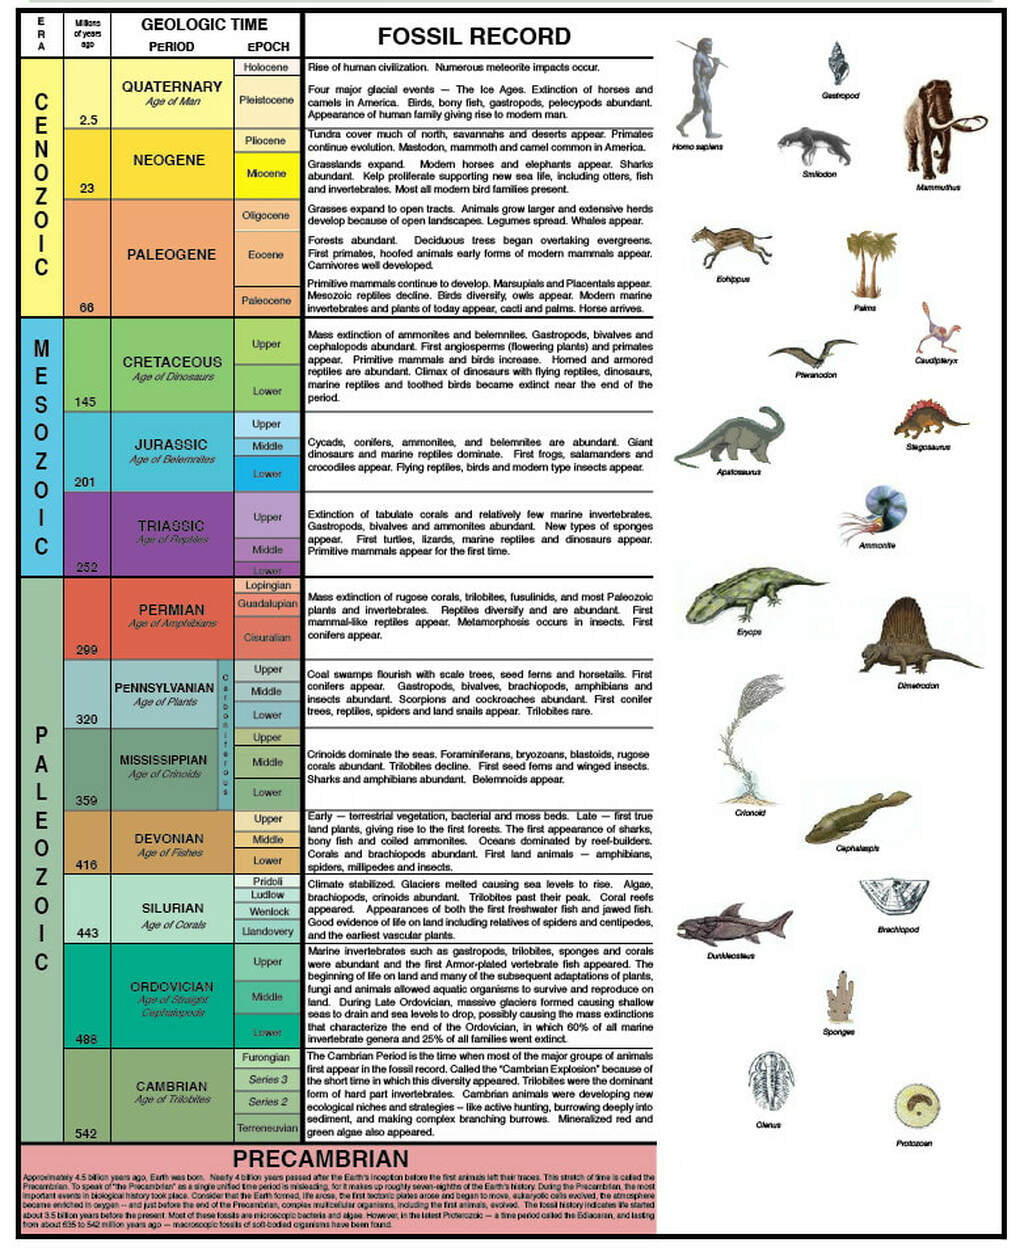 geologic-timeline-scale-vector-illustration-labeled-earth-history